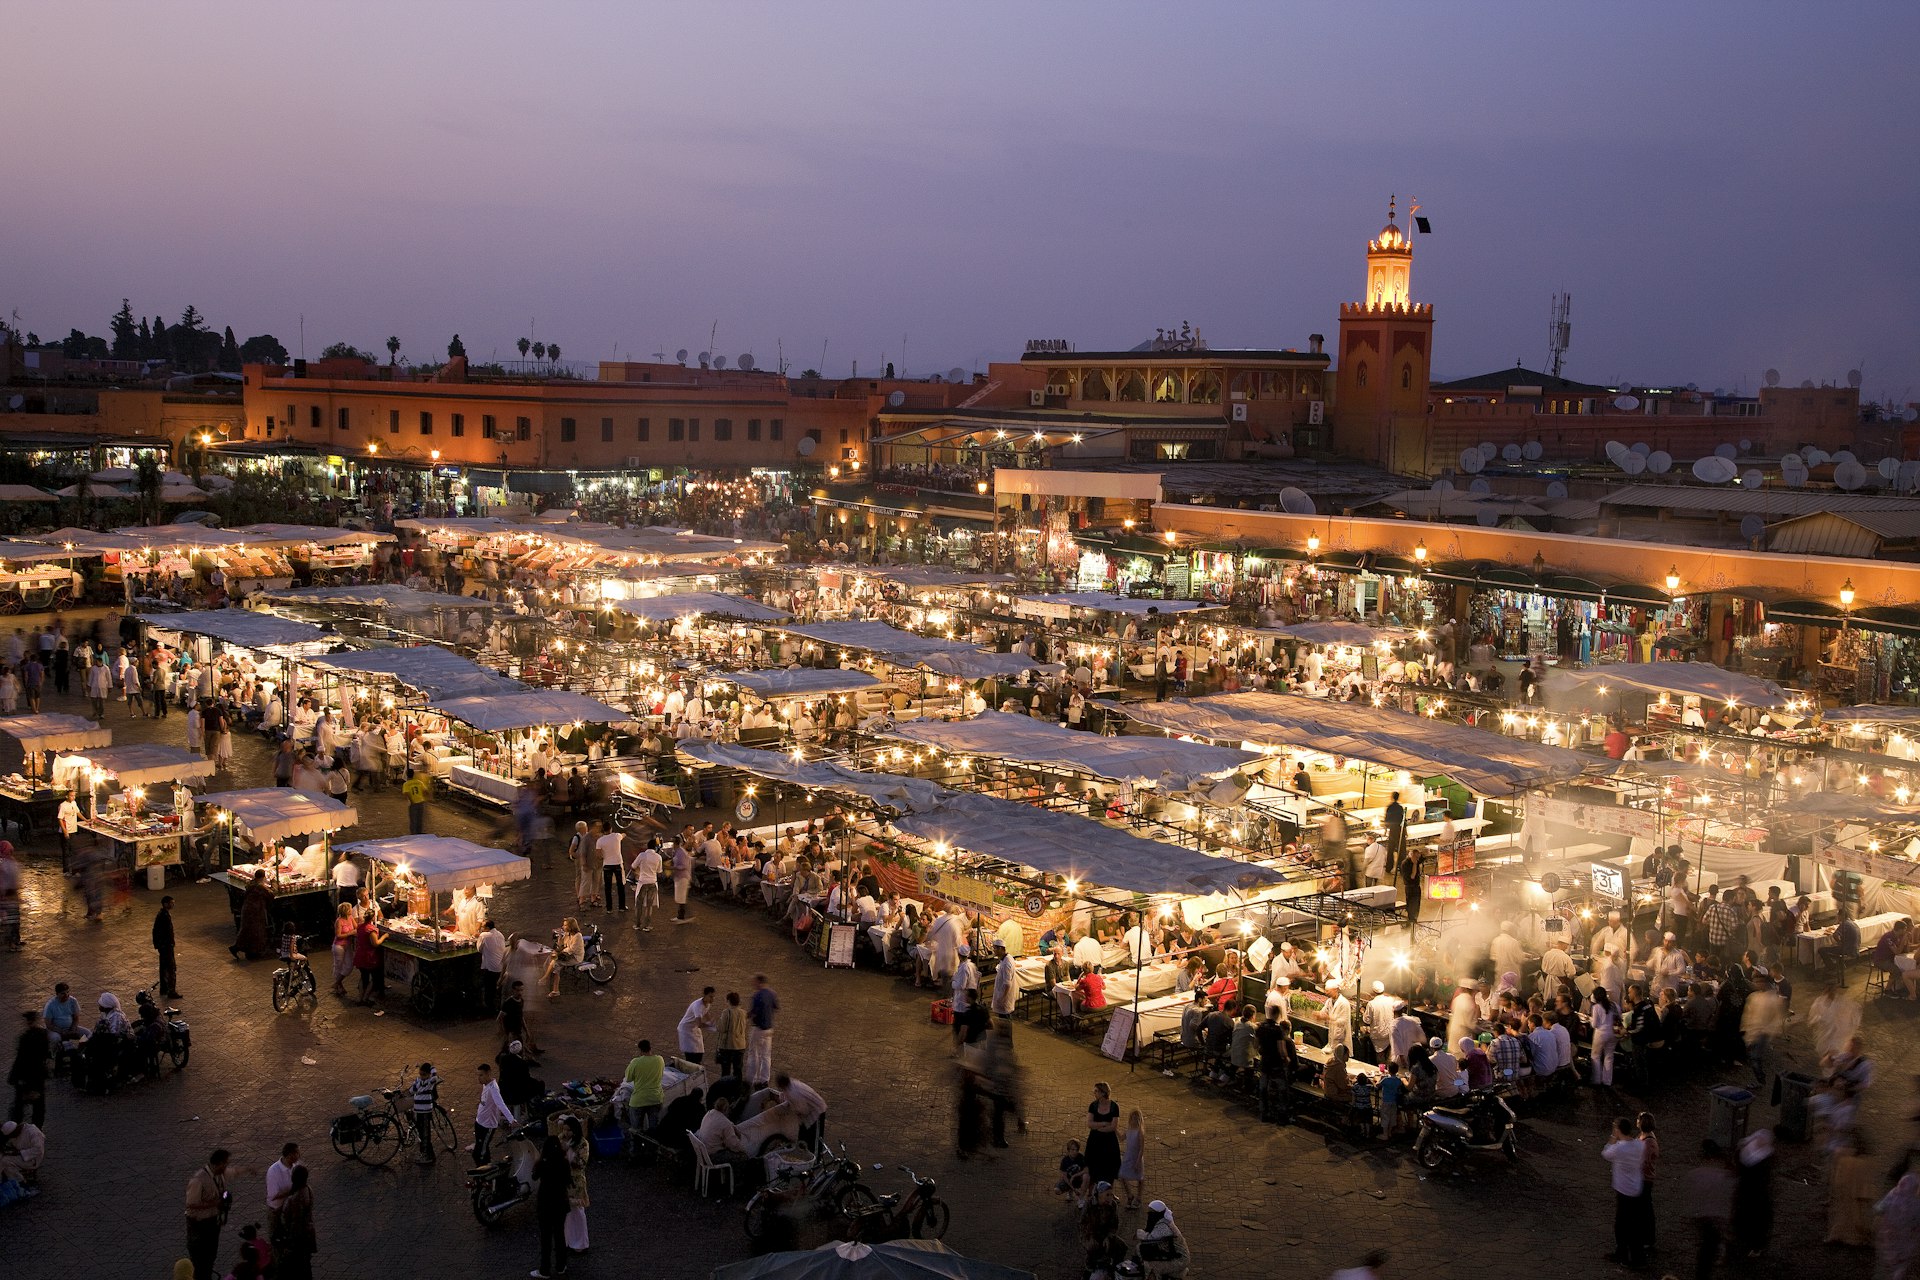 Famous Djemaa El Fna square in Marrakesh, Morocco, at dusk